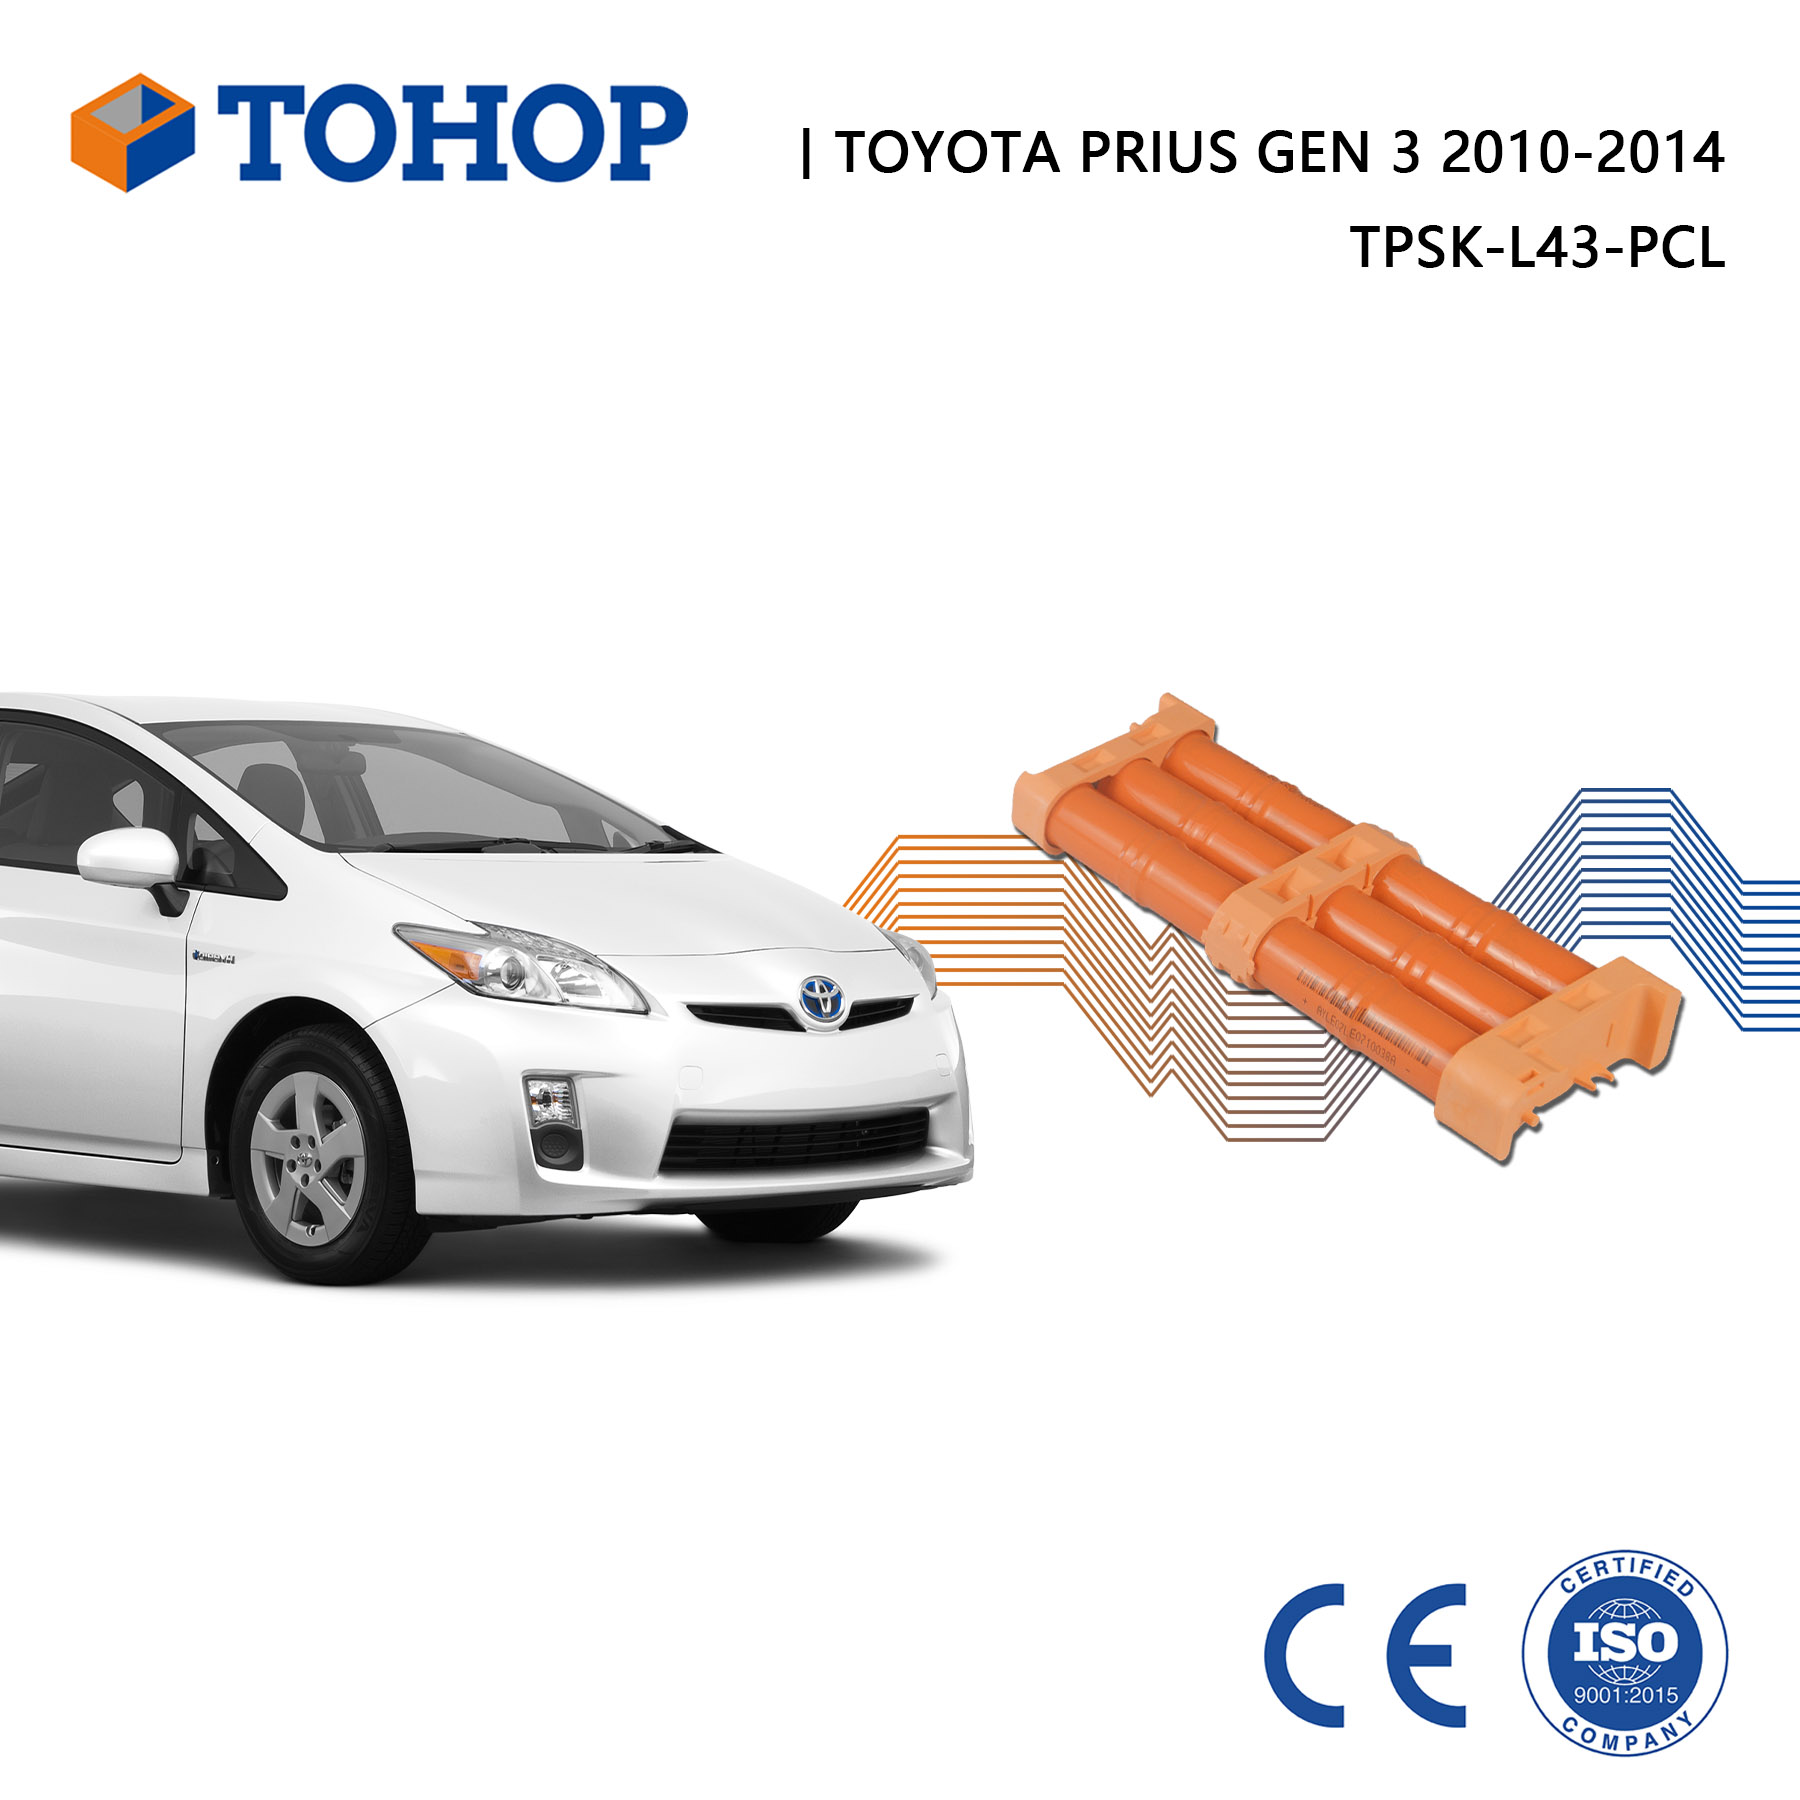 Replacement Prius Gen 3 2013 Hybrid Car Battery for Toyota